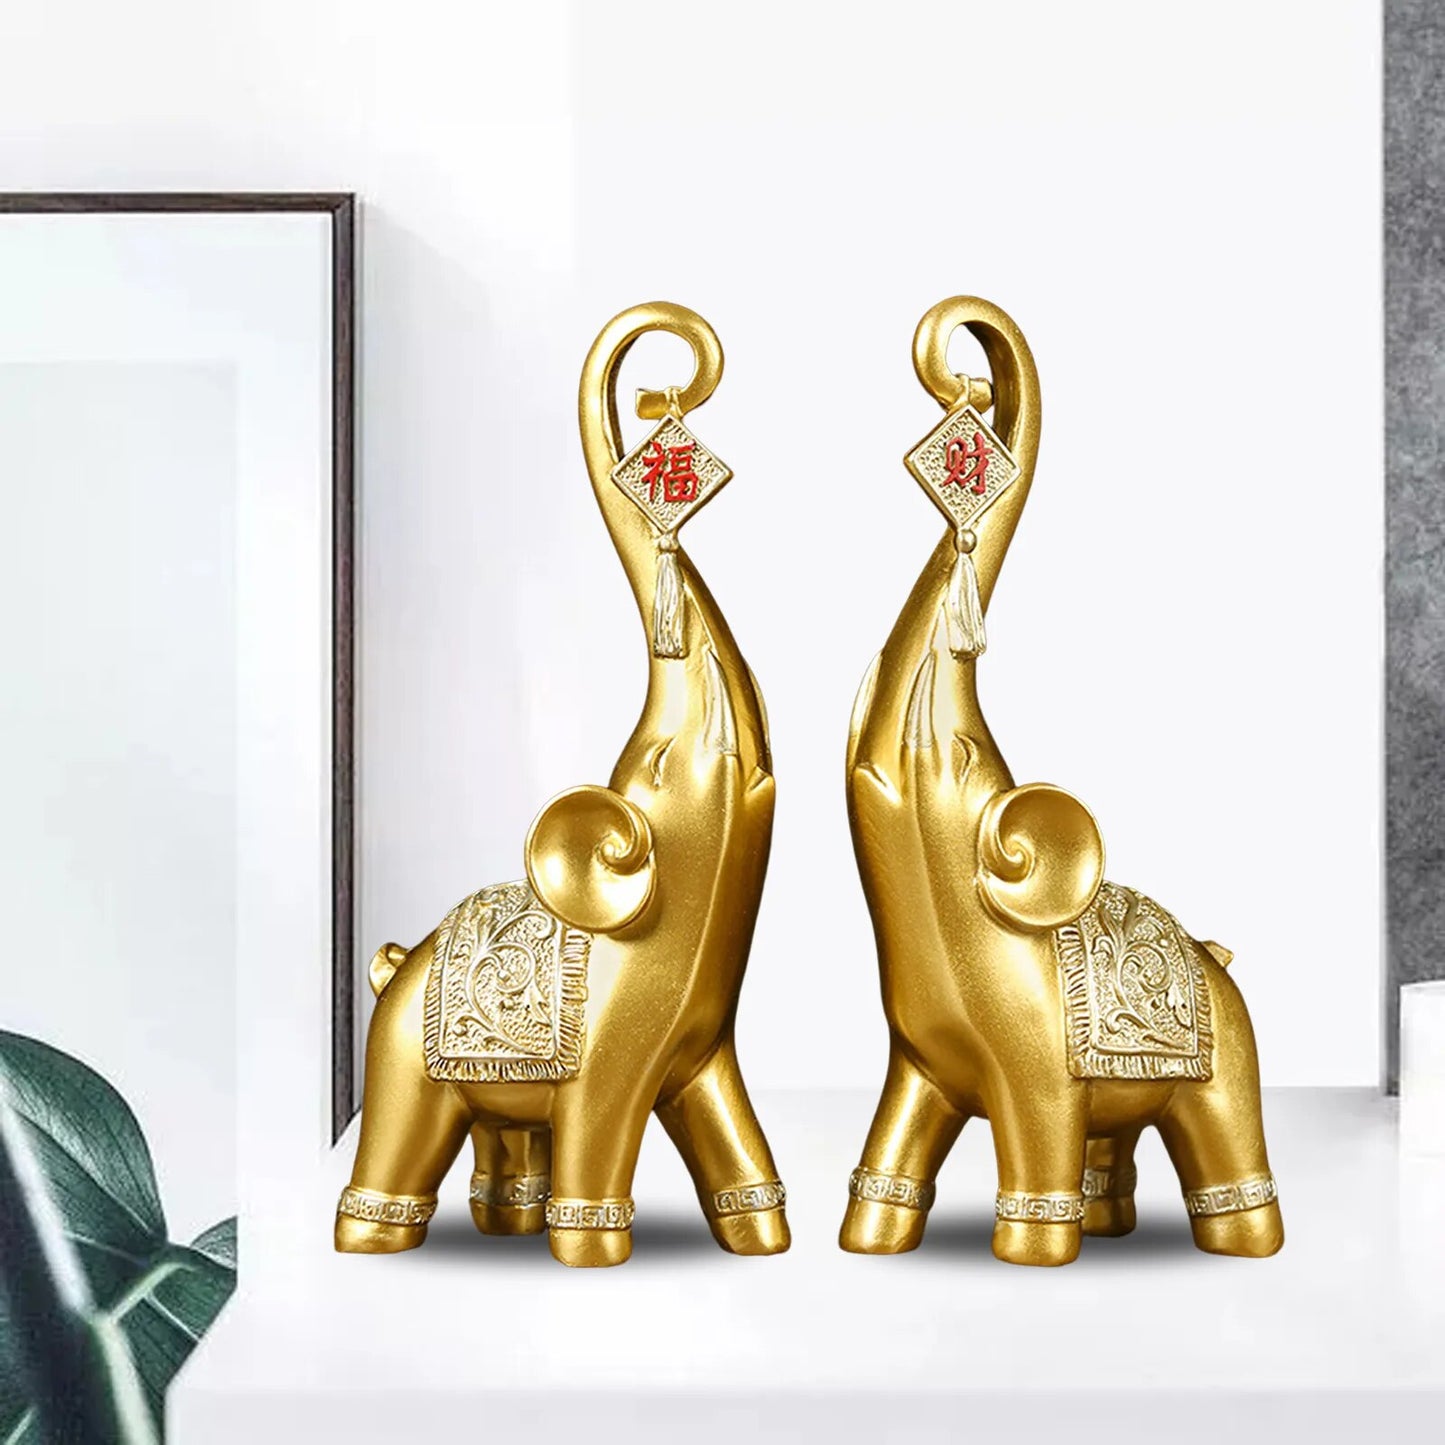 2x Nordic Style Resin Elephant Statues Animal Sculpture Ornaments for Home Office Decoration Dorm Desktop Decor Birthday Gift